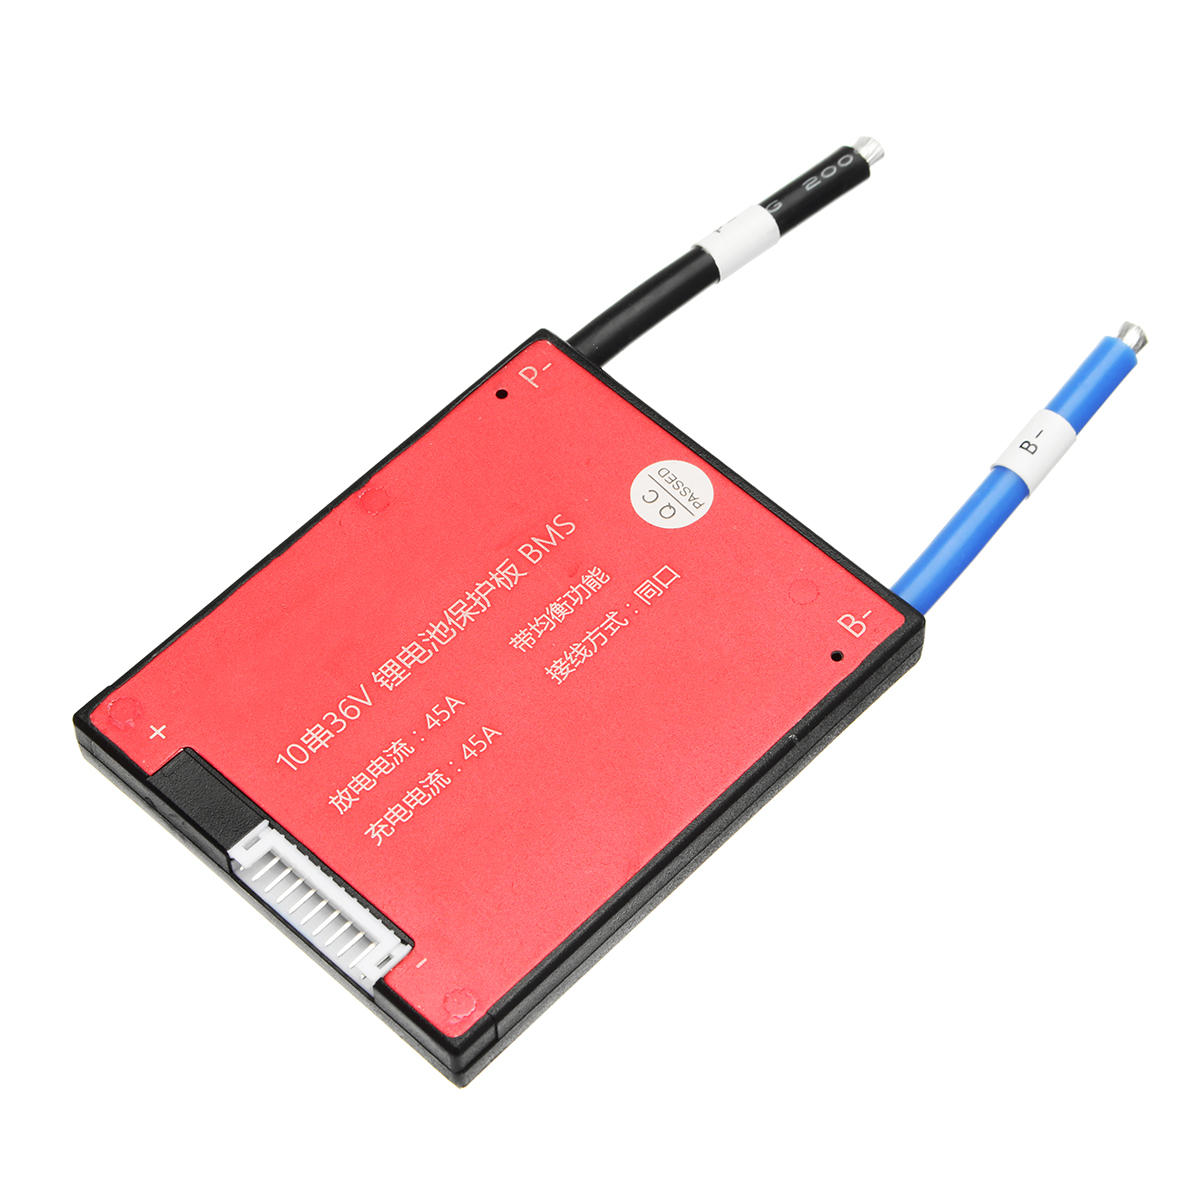 

36V 10S 16A 45A BMS Li-ion Lipolymer Battery Protection Board for Ebike Ebicycle